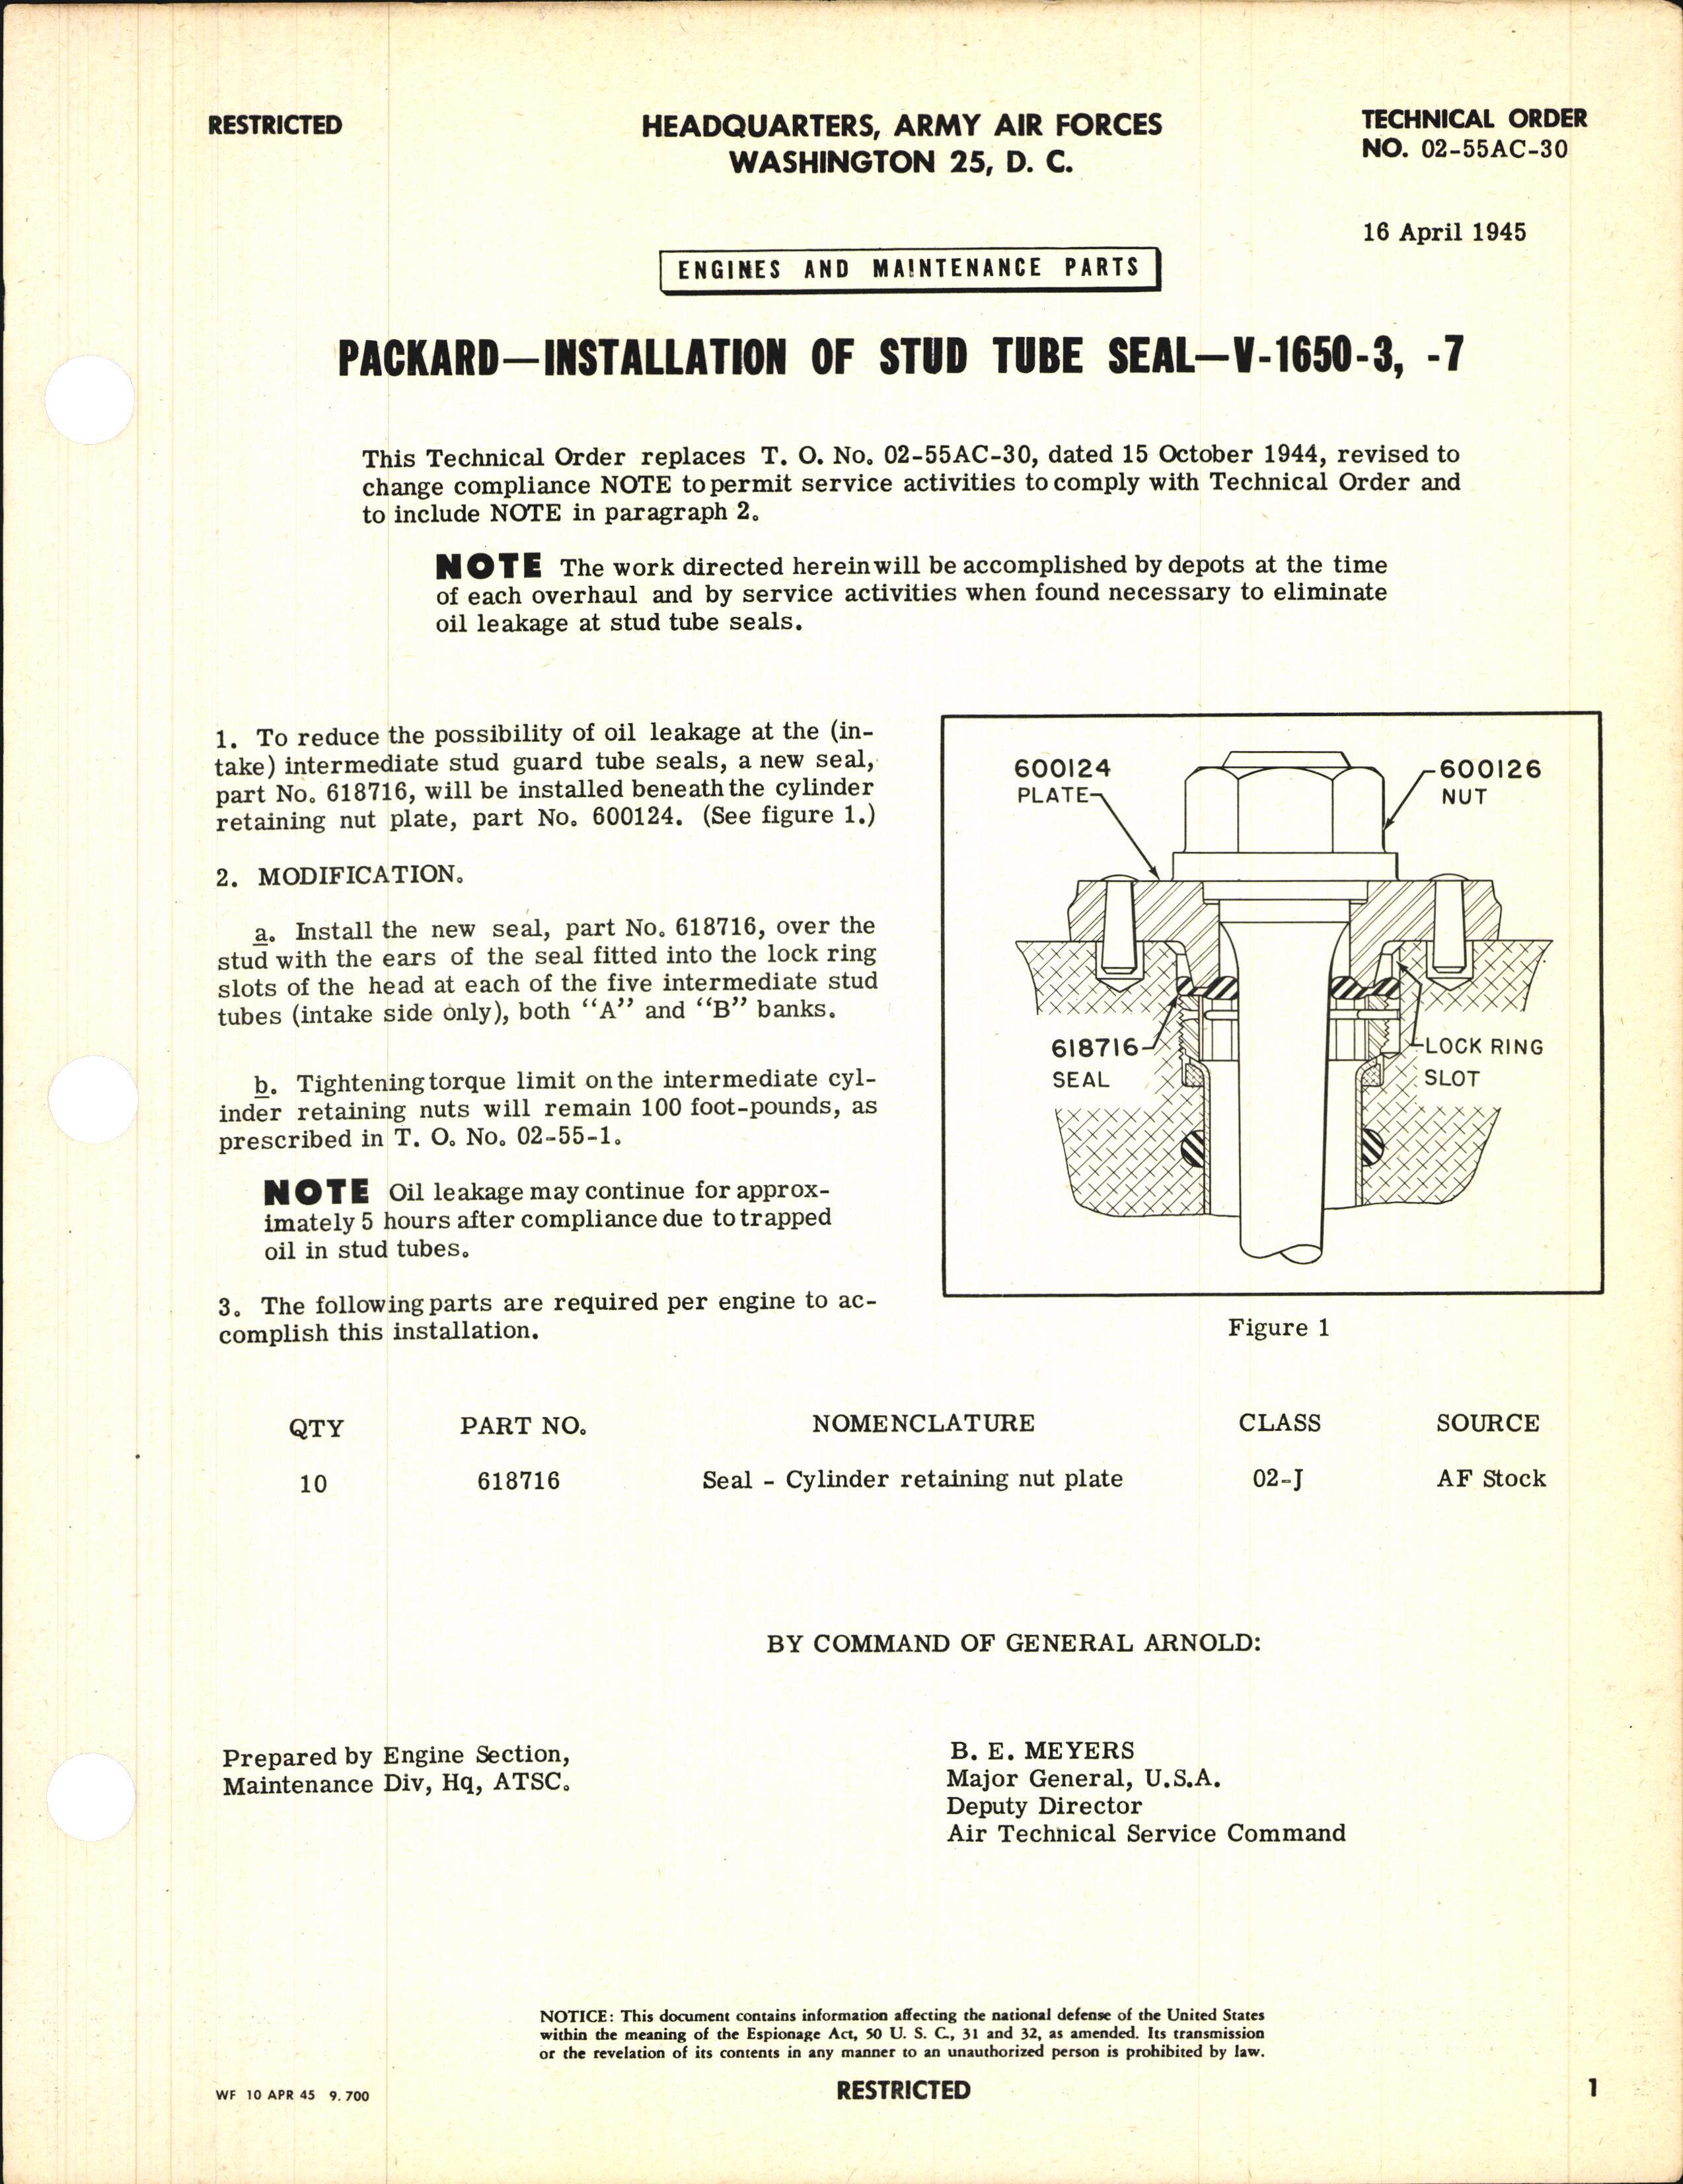 Sample page 1 from AirCorps Library document: Installation of Stud Tube Seal for V-1650-3 and -7